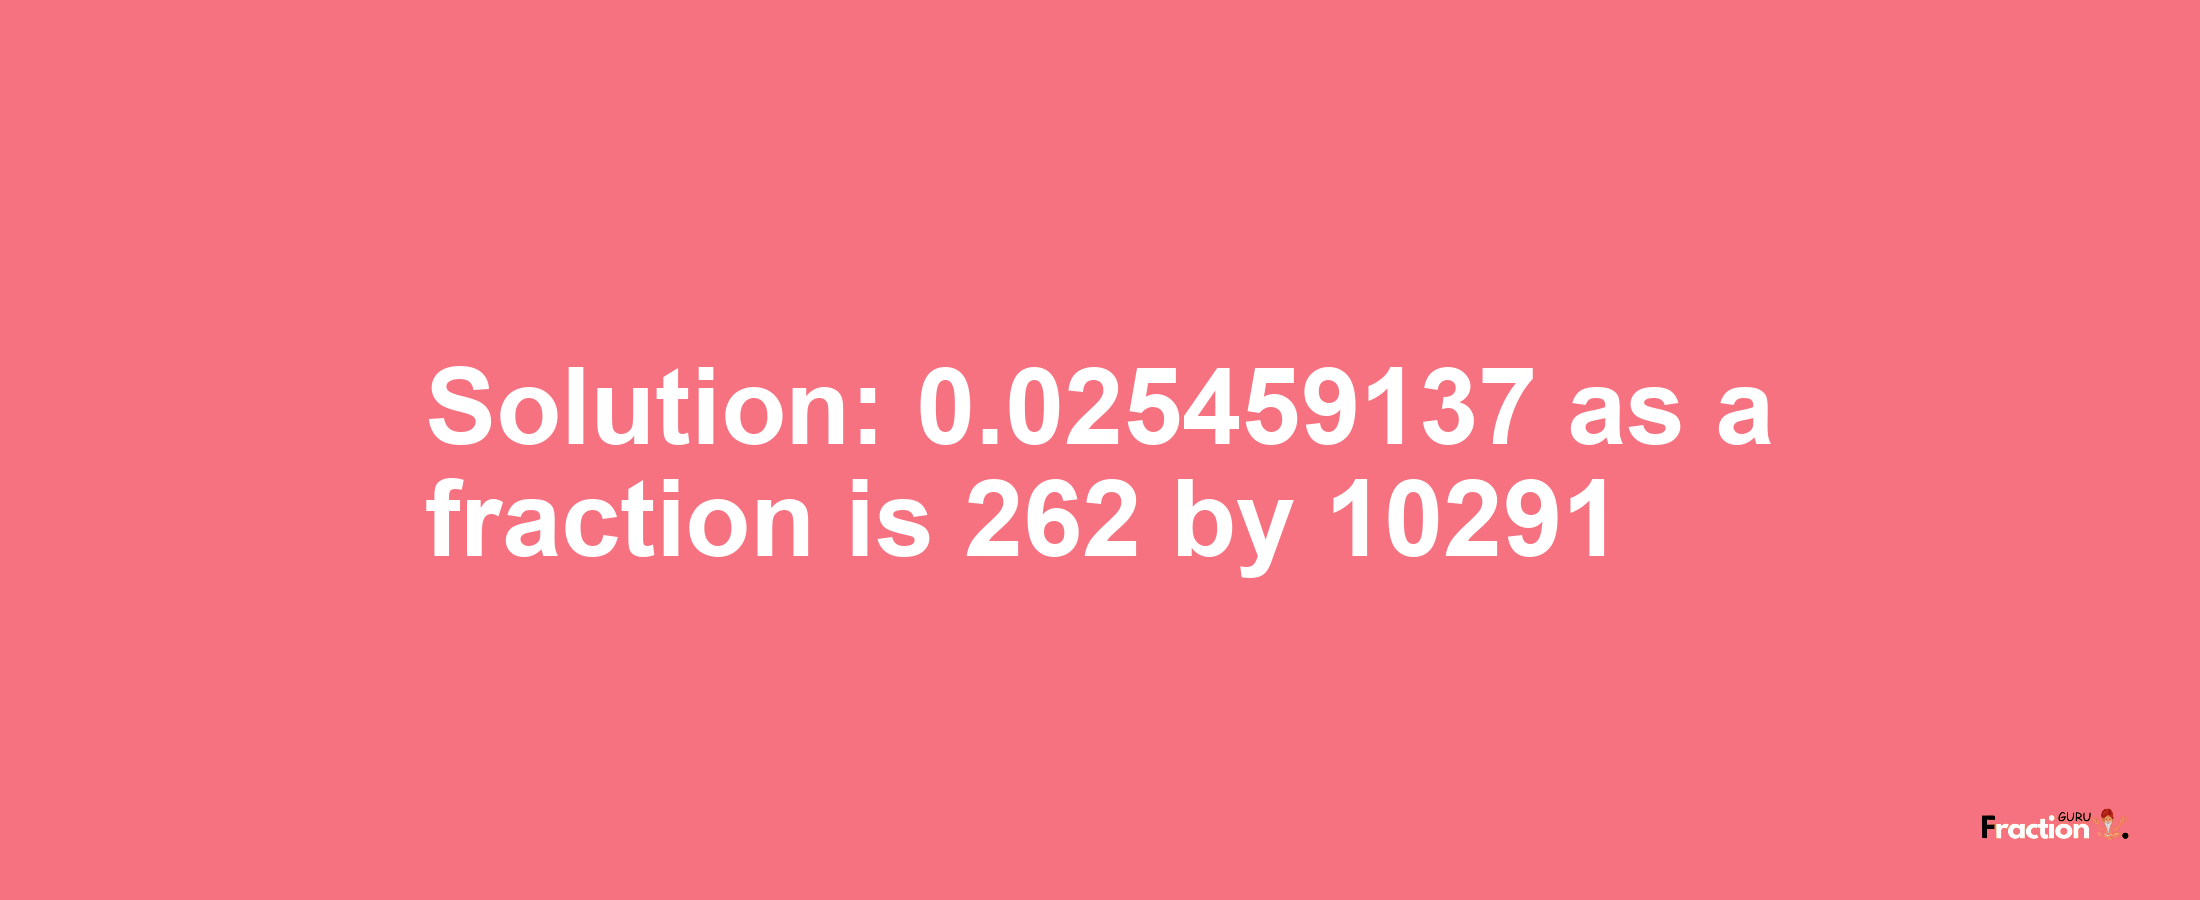 Solution:0.025459137 as a fraction is 262/10291